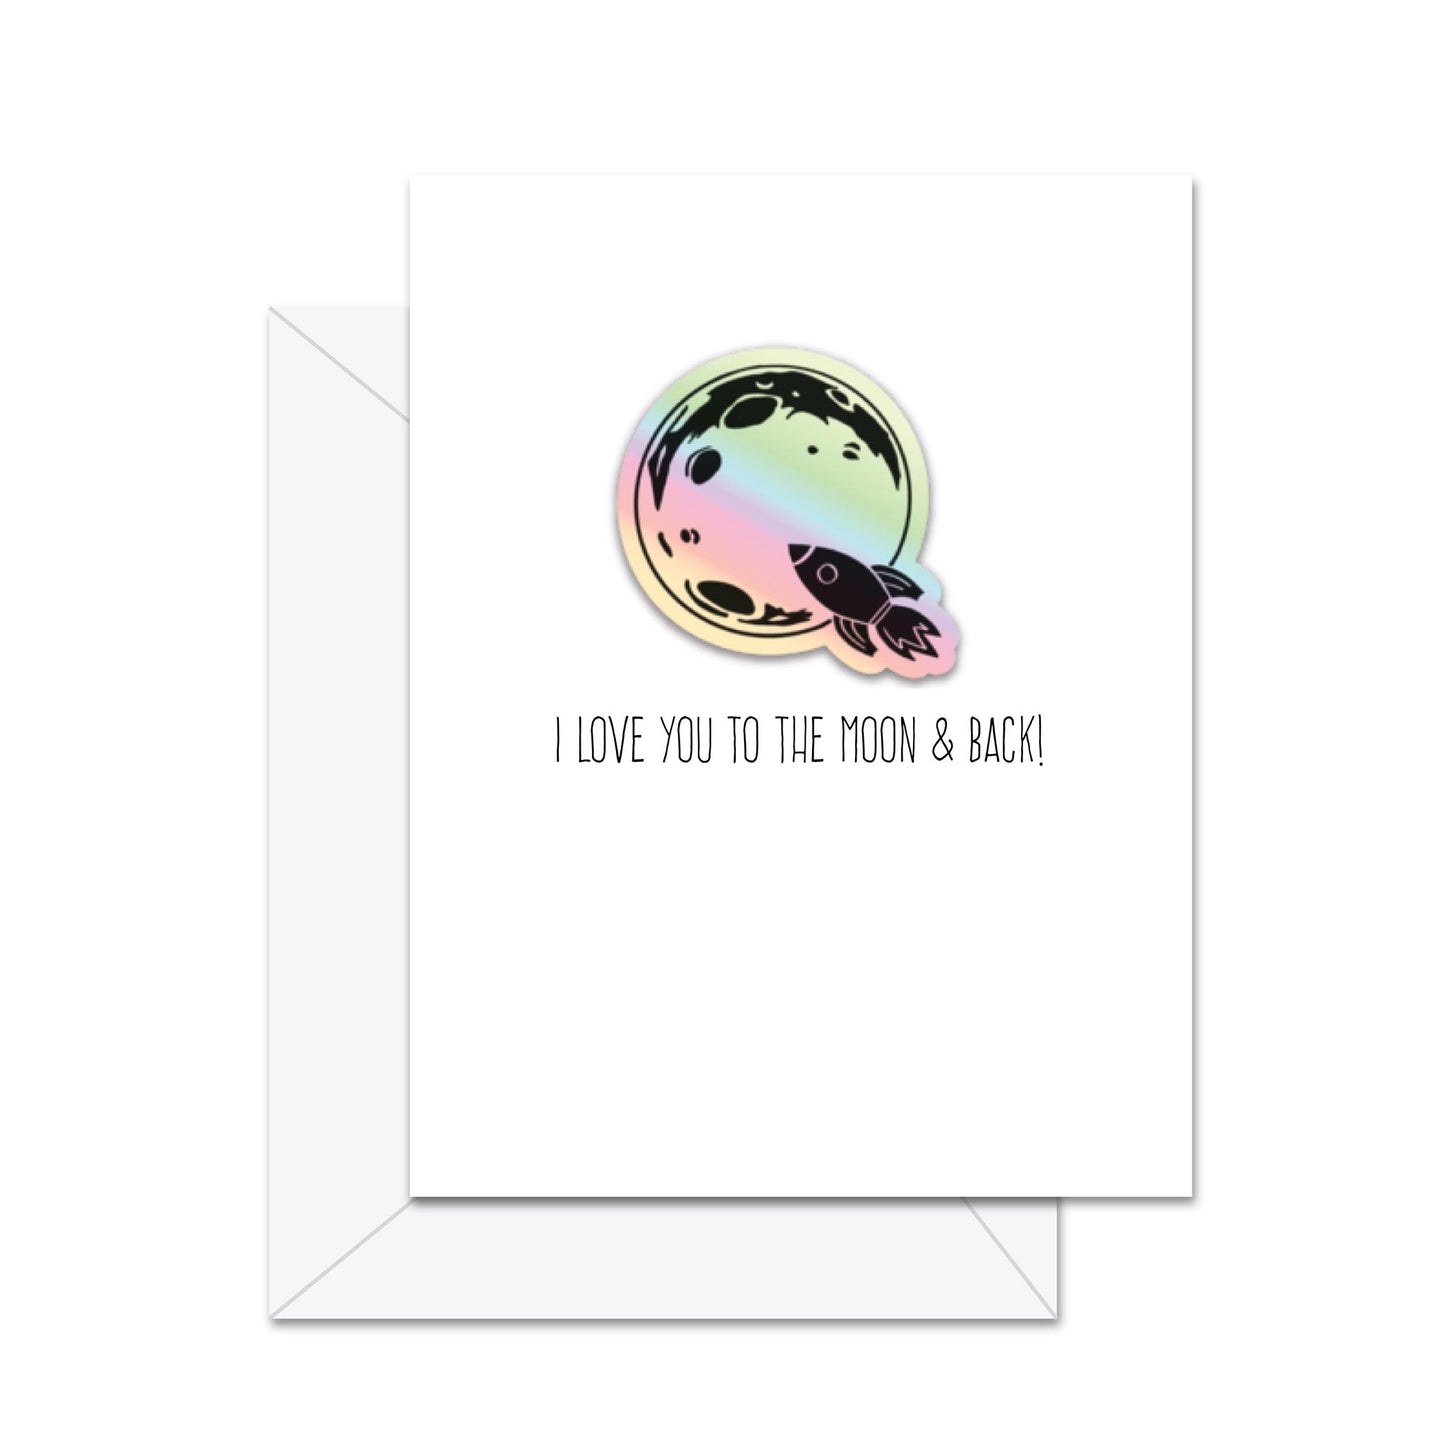 I Love You To The Moon & Back - Sticker Greeting Card